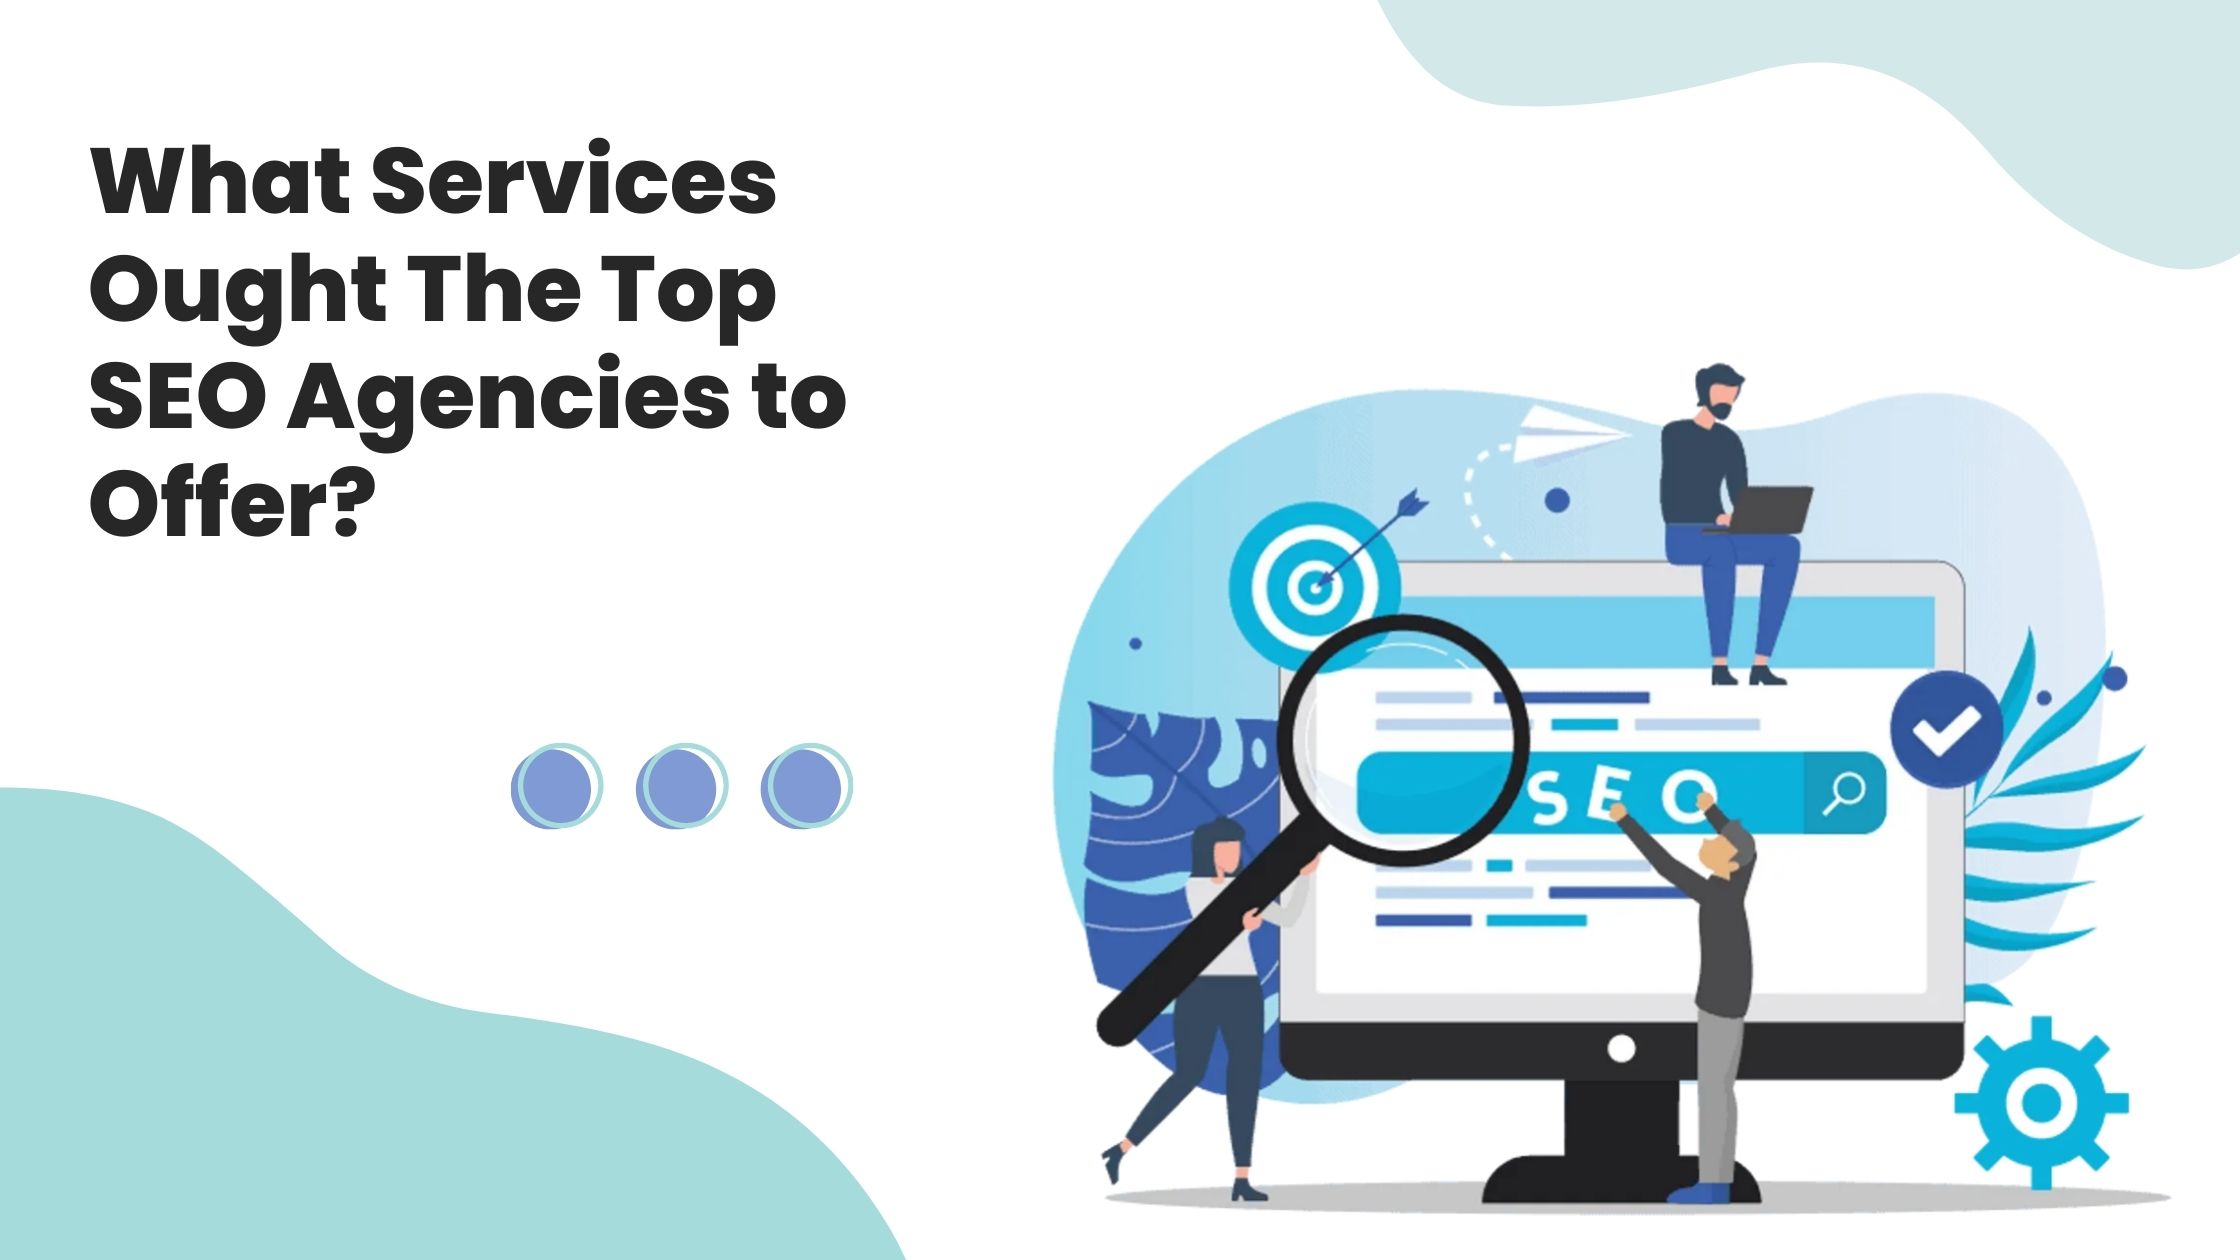 What Services Ought The Top SEO Agencies to Offer